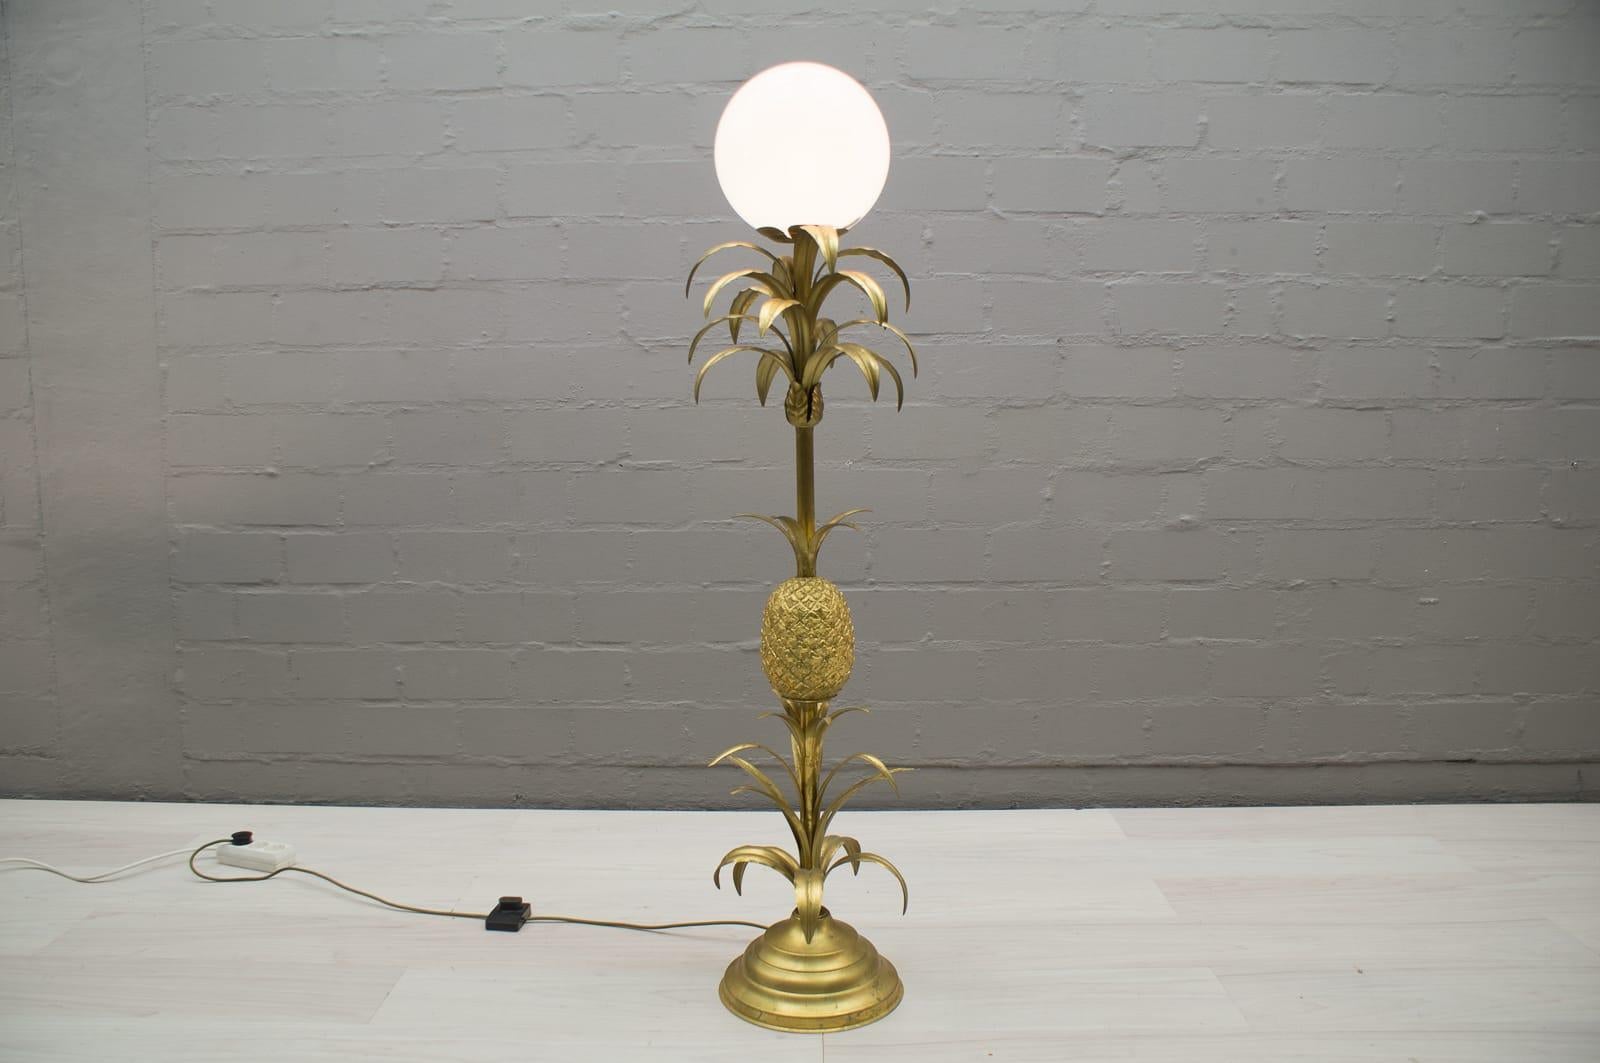 This lamp requires E27 bulbs.
Very good vintage condition.
Suitable for all living areas and very decorative.
Executed in brass, aluminium and cast metal. The lamp needs 1 x E27 Edison screw fit bulb, is wired, and in working condition. It runs